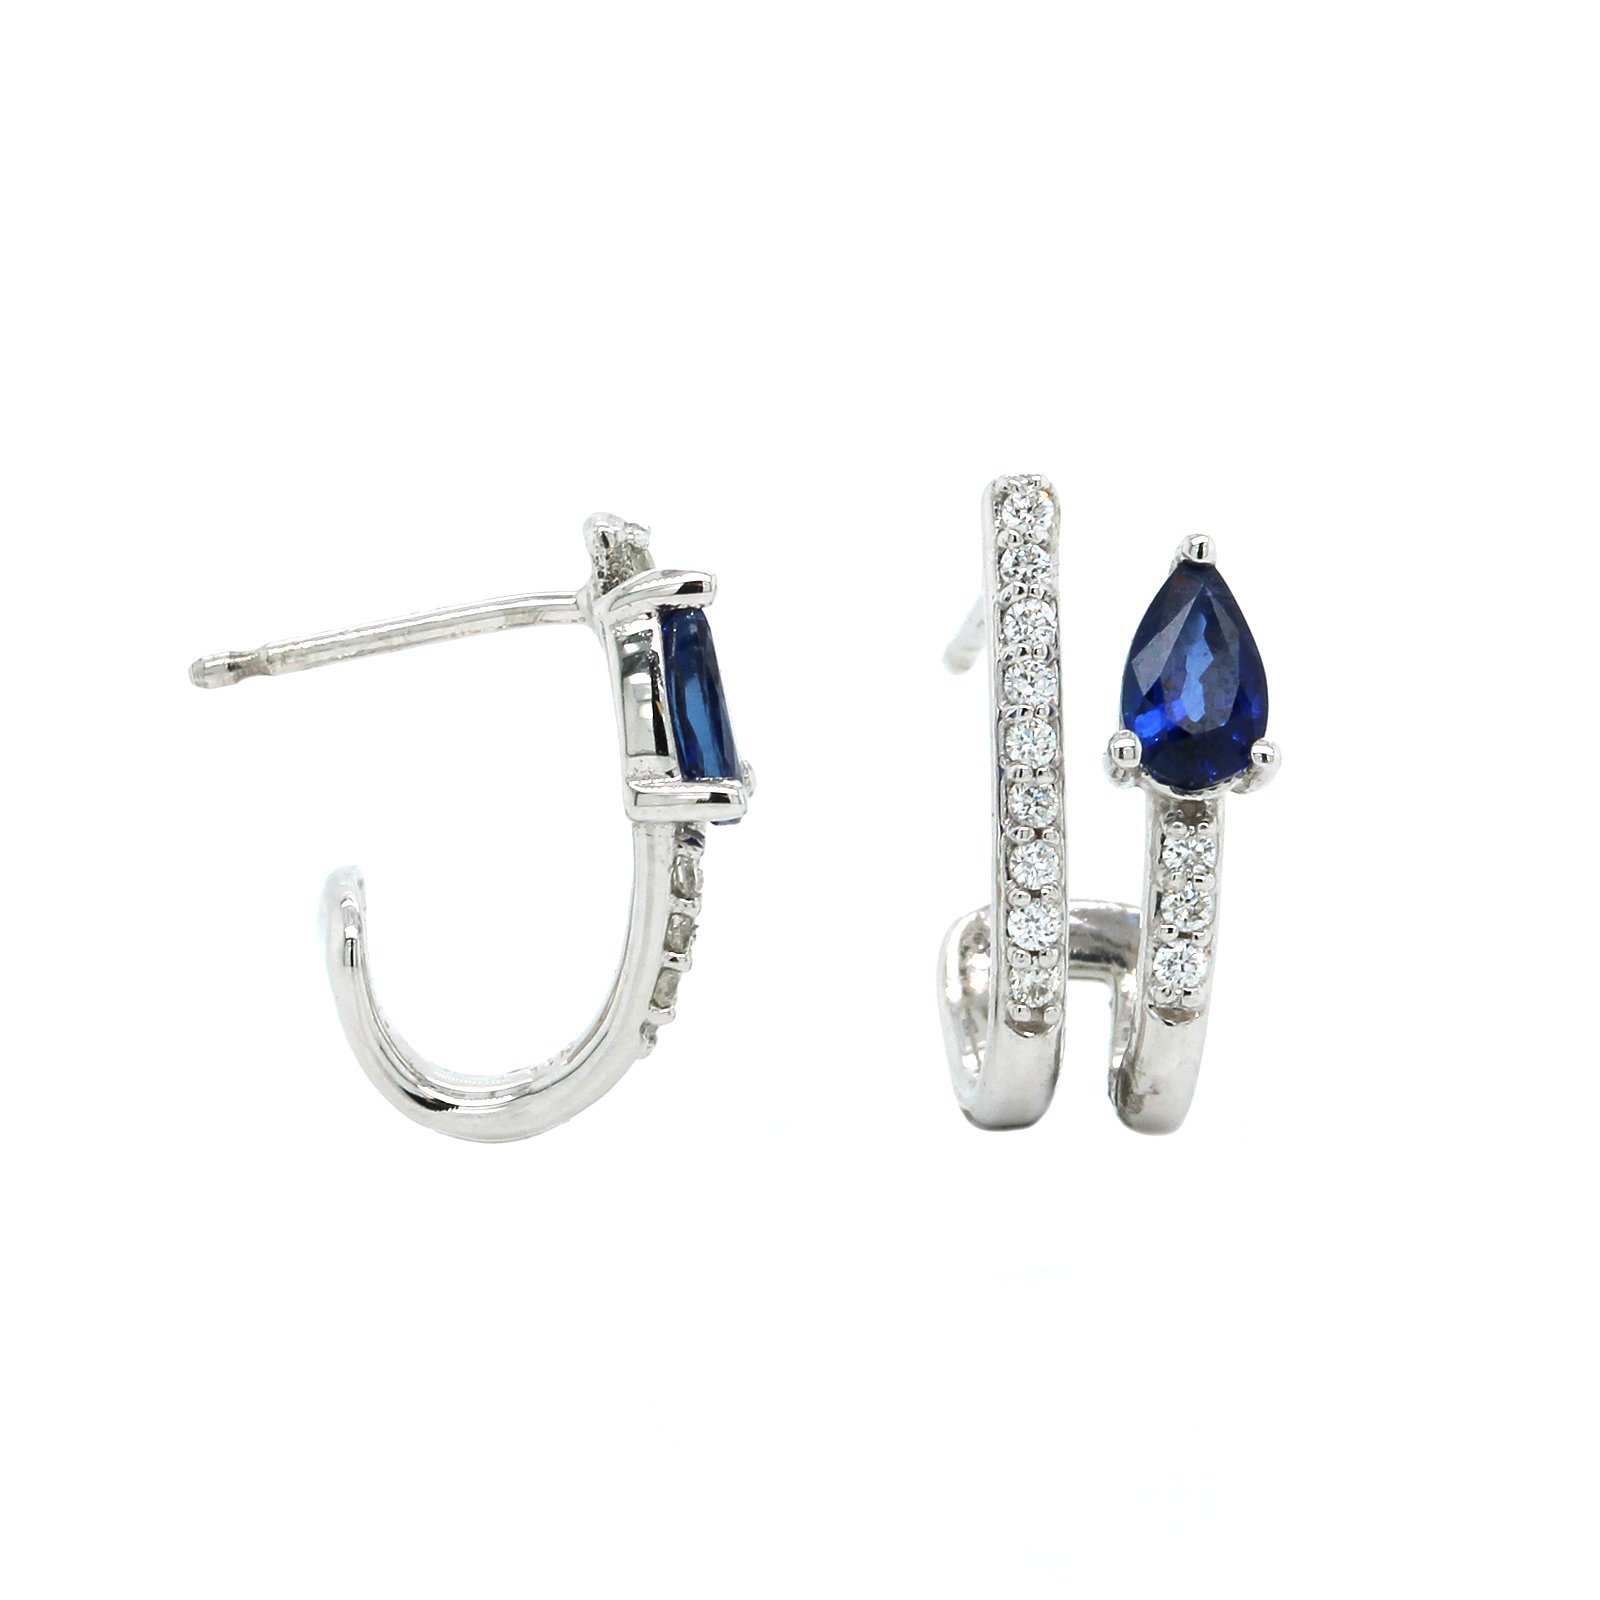 The-Janet-14K-White-Gold-2-Row-Diamond-and-Sapphire-Huggie-Earrings-14K-White-Gold-front-SDE1557.jpeg